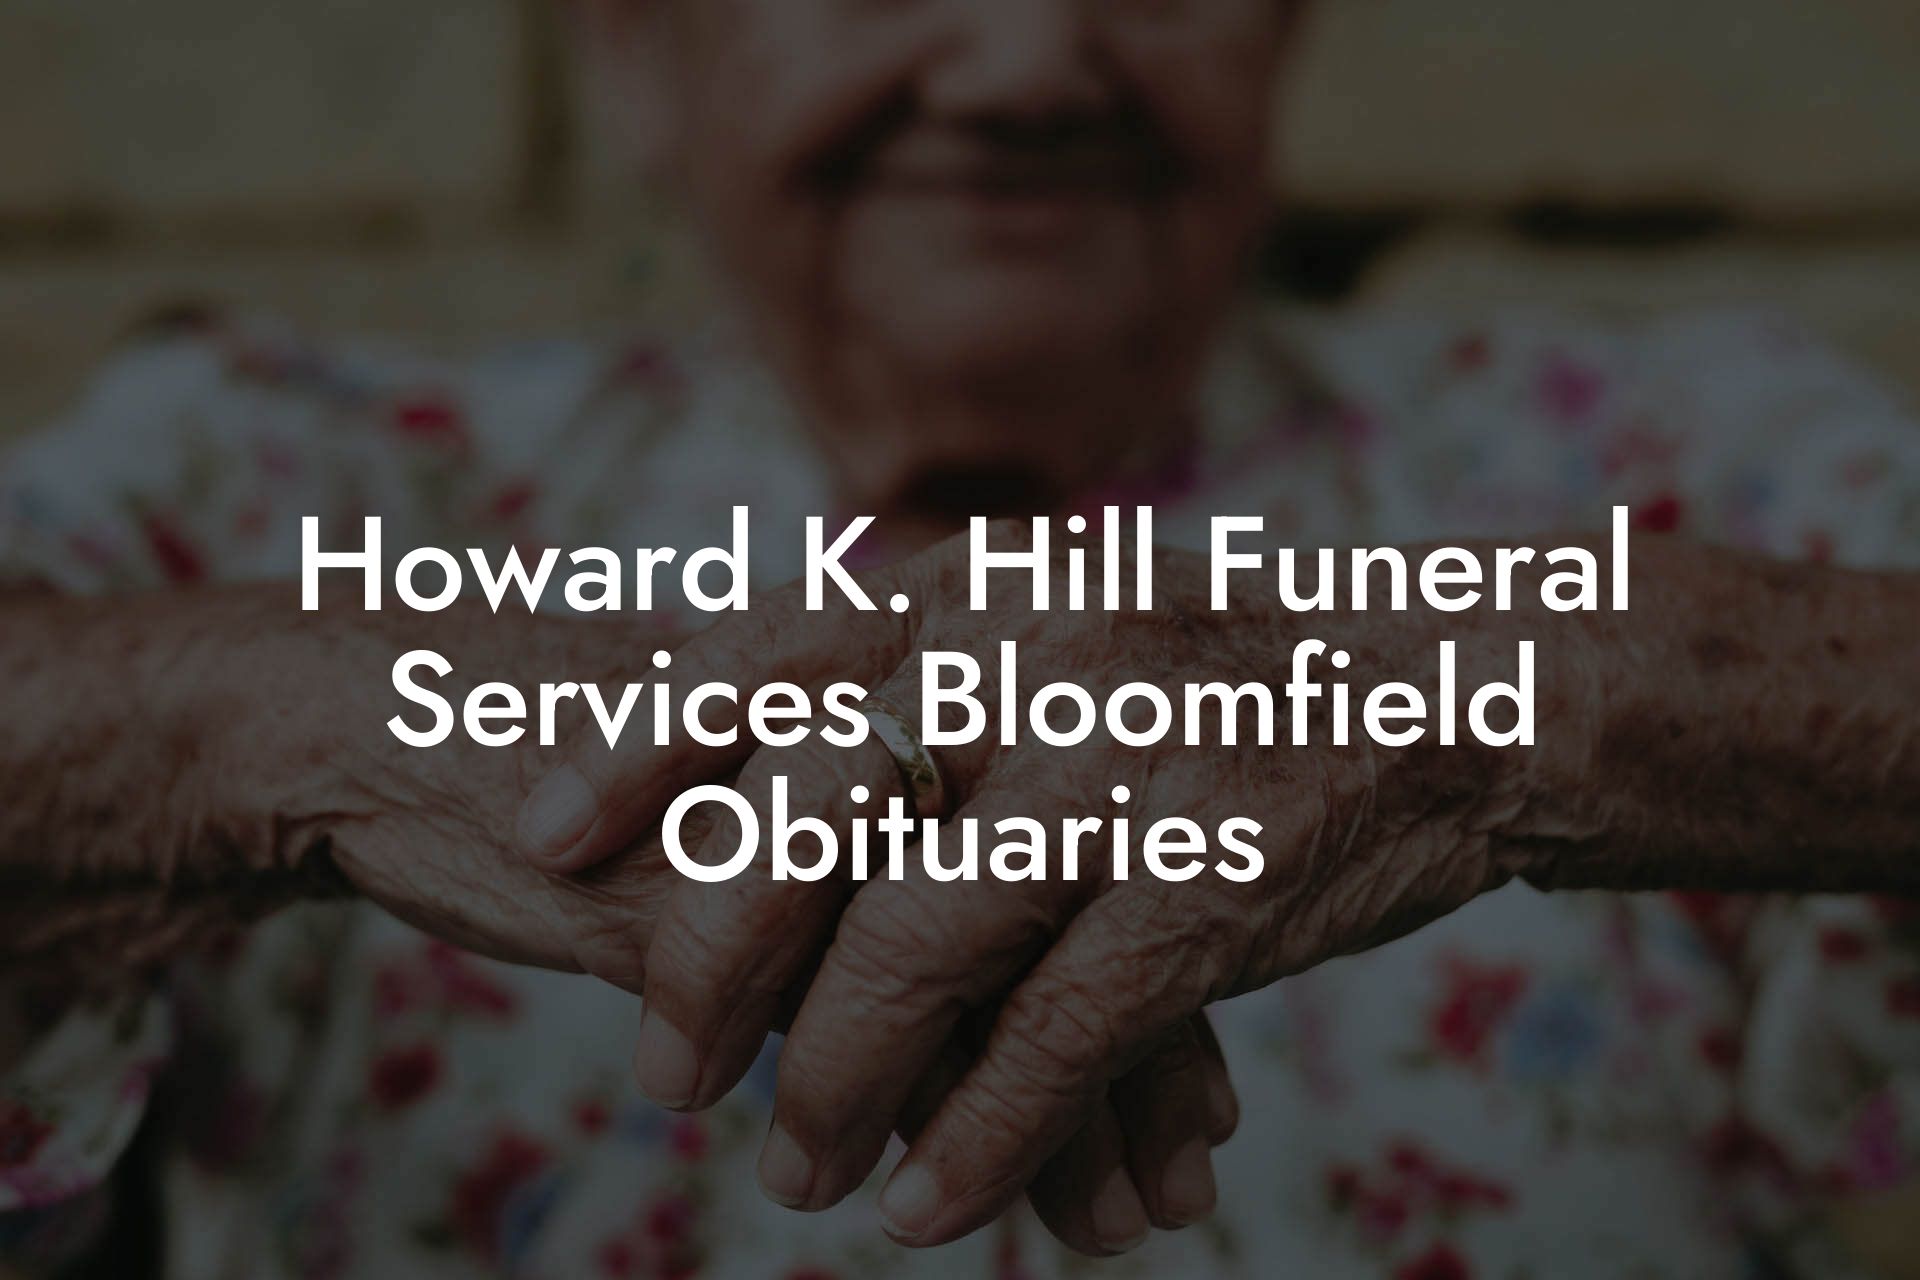 Howard K. Hill Funeral Services Bloomfield Obituaries